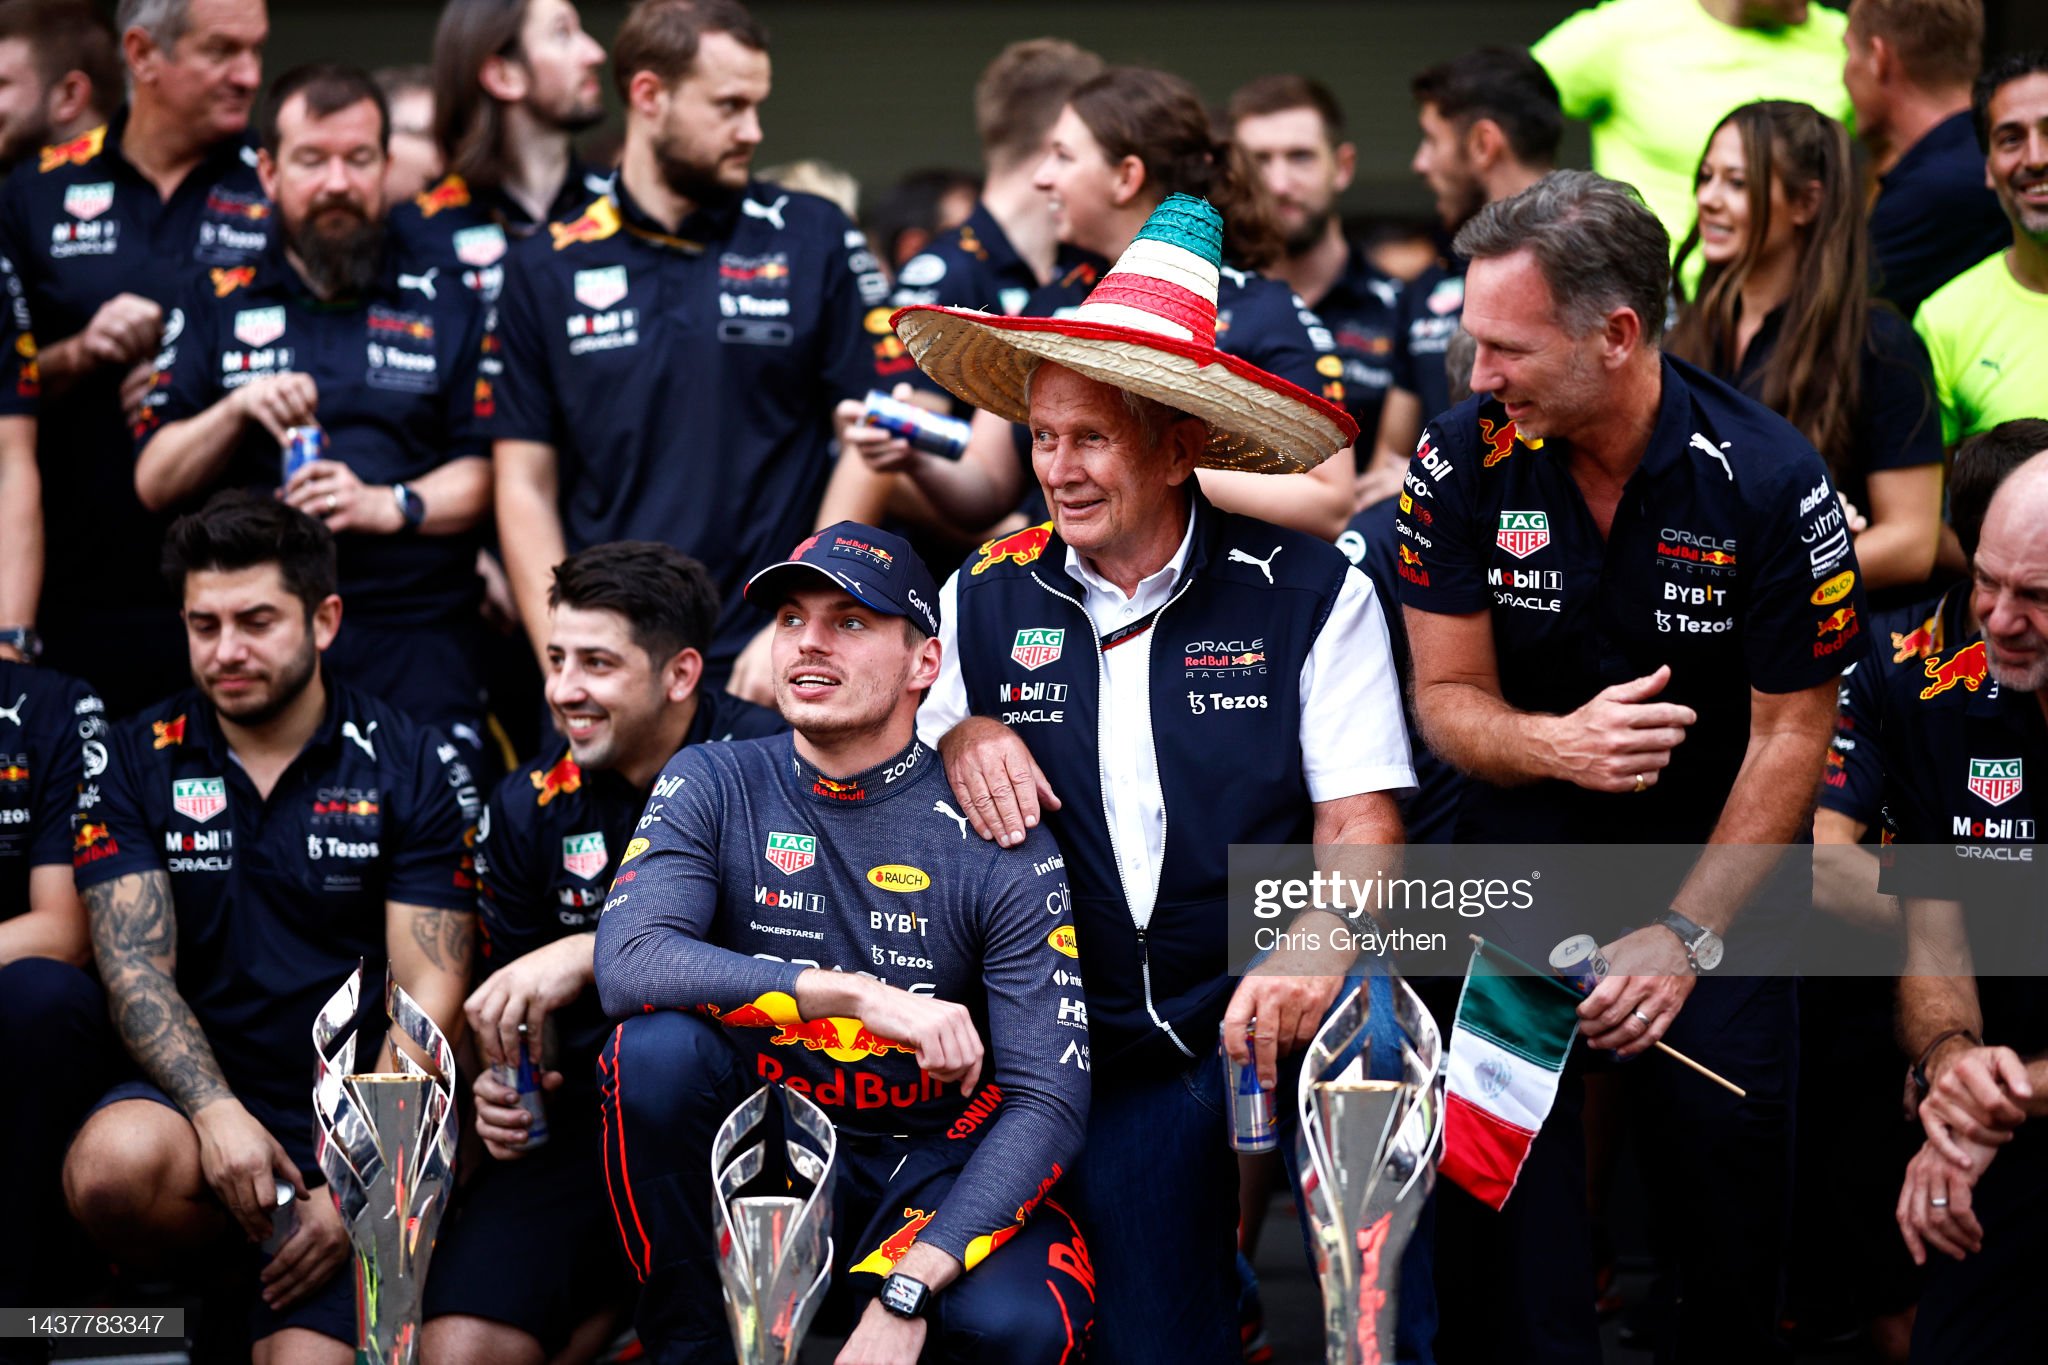 Race winner Max Verstappen and the Red Bull Racing team celebrate after the F1 Grand Prix.